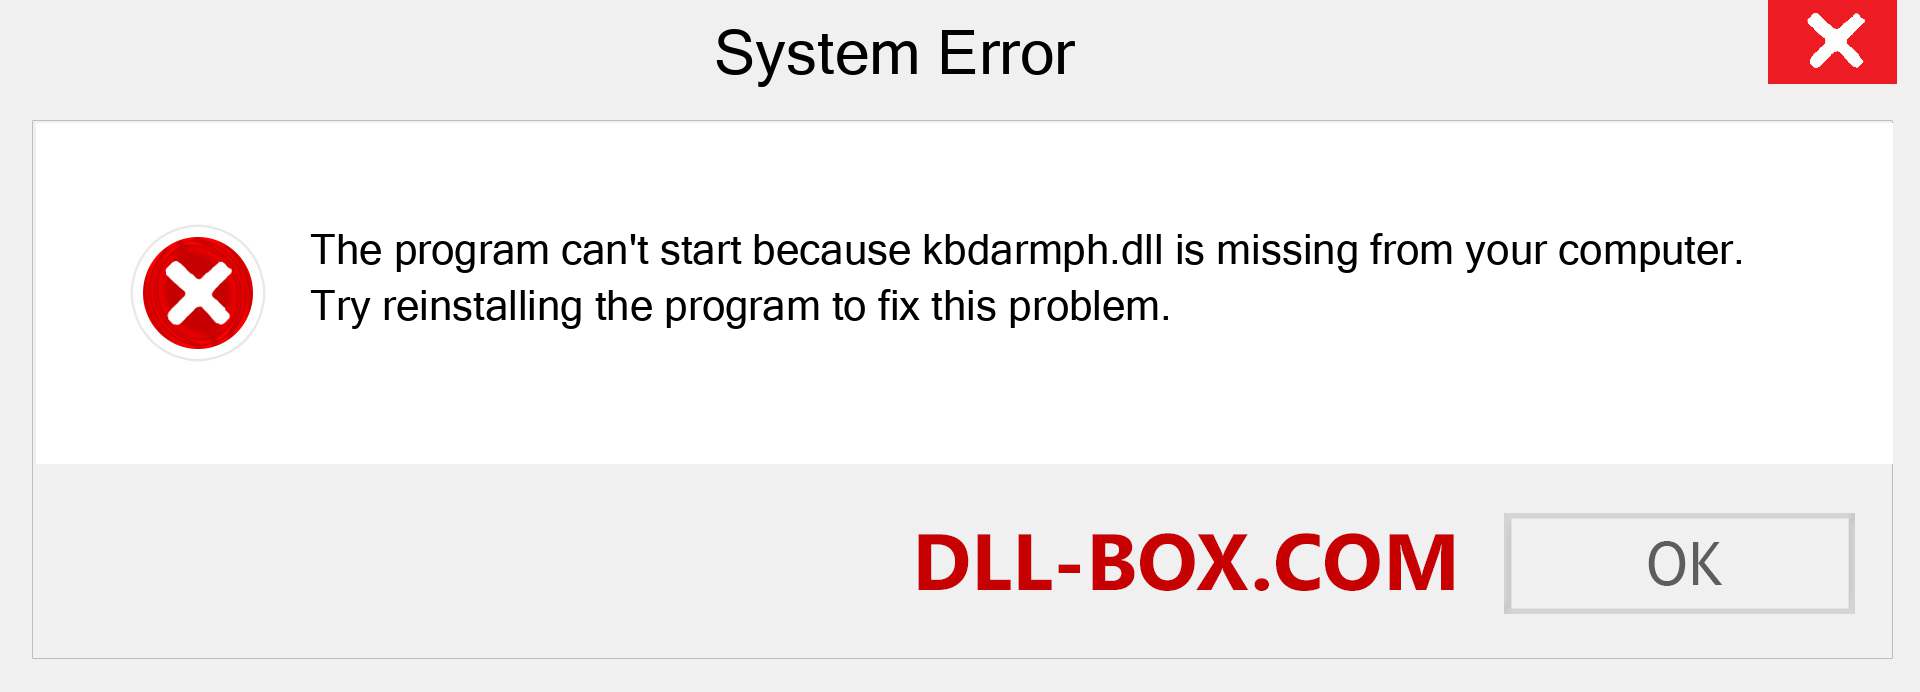  kbdarmph.dll file is missing?. Download for Windows 7, 8, 10 - Fix  kbdarmph dll Missing Error on Windows, photos, images